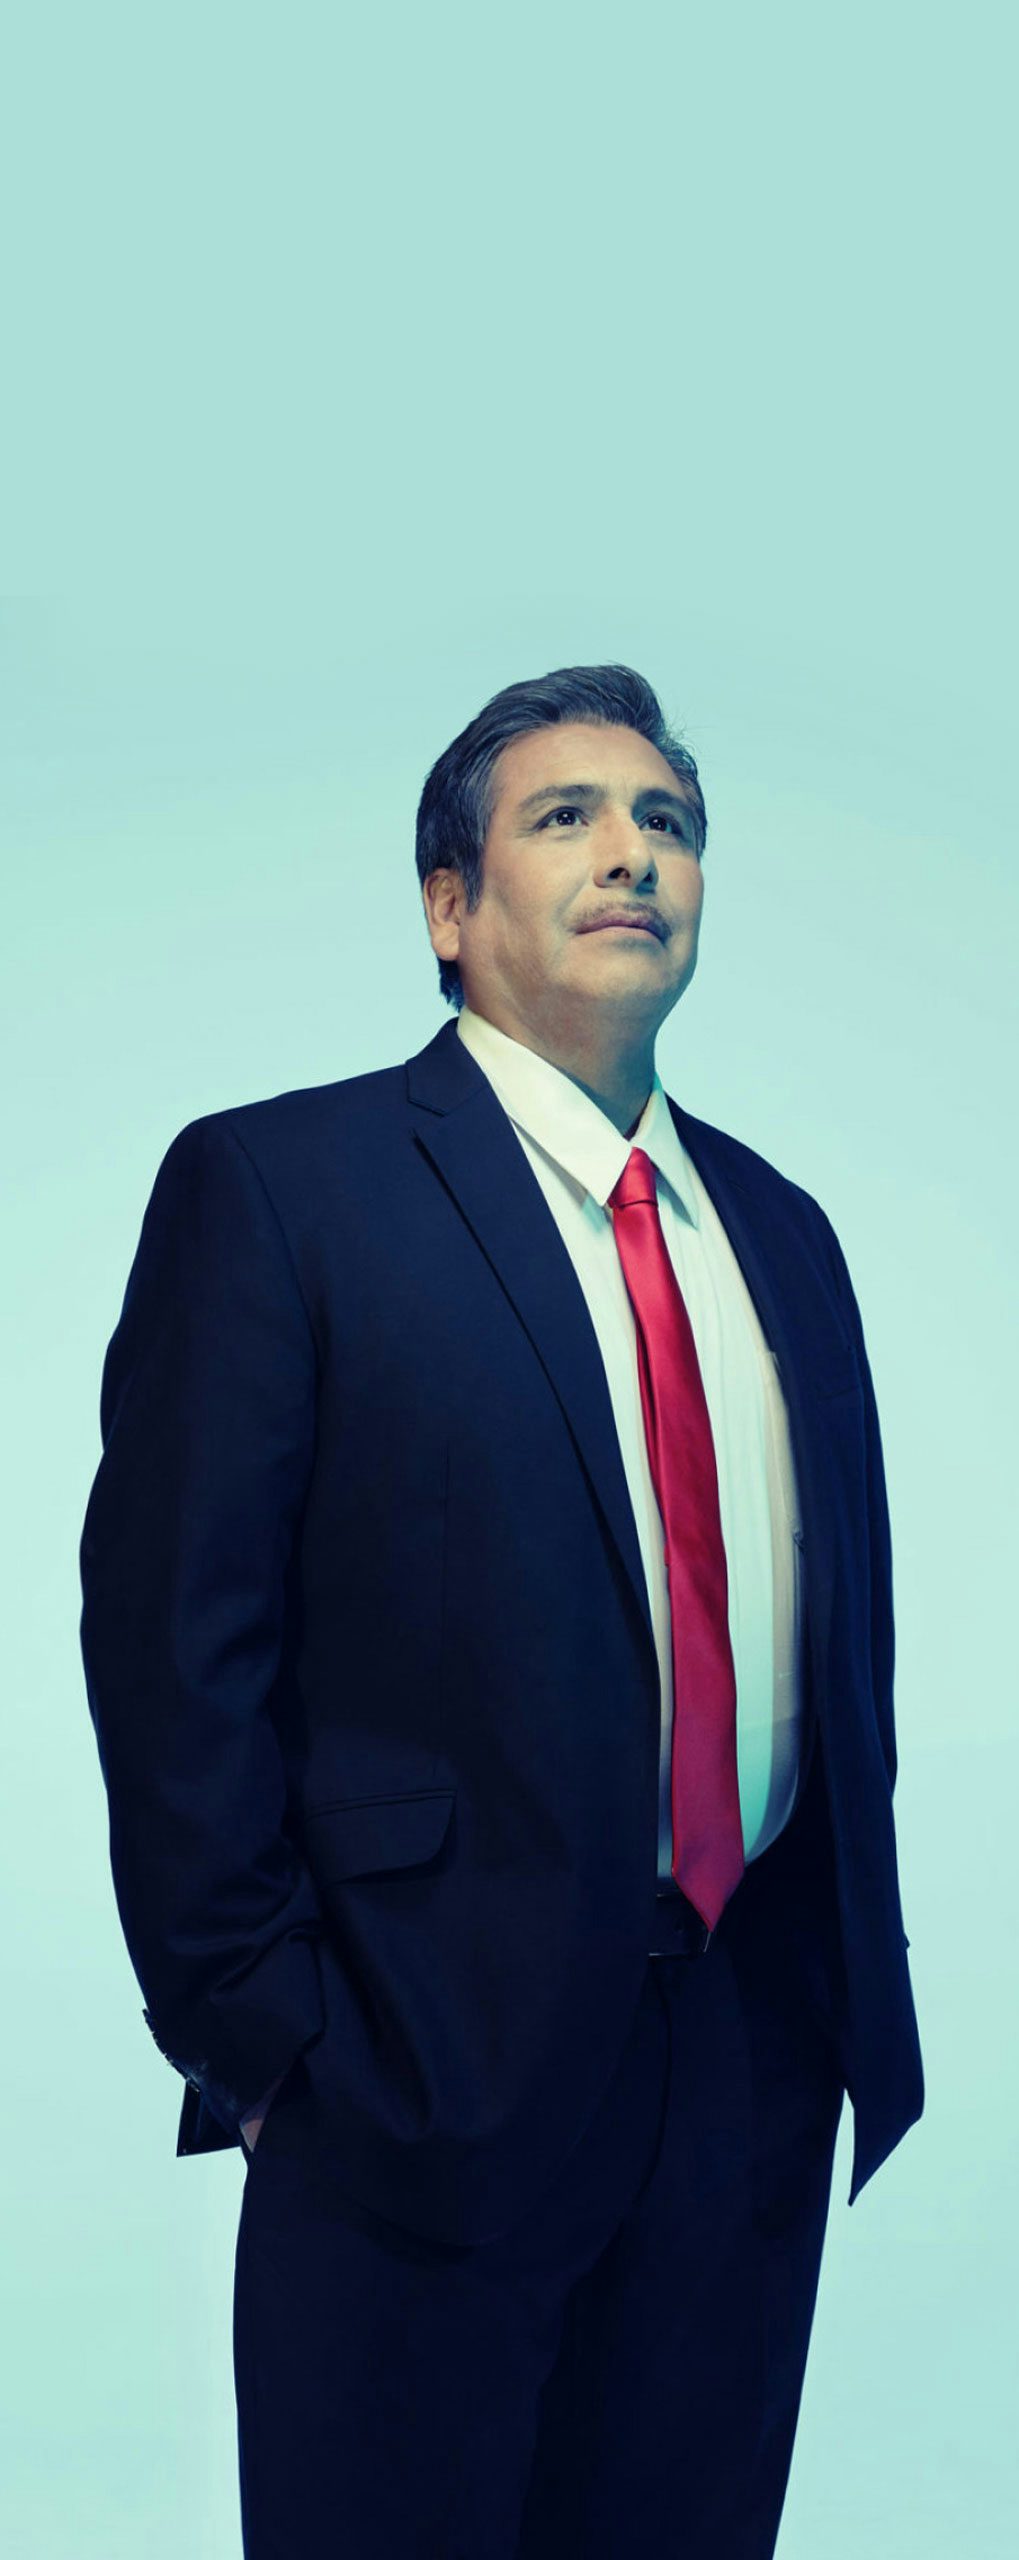 A Hispanic/Latino man in a suit standing in a light background